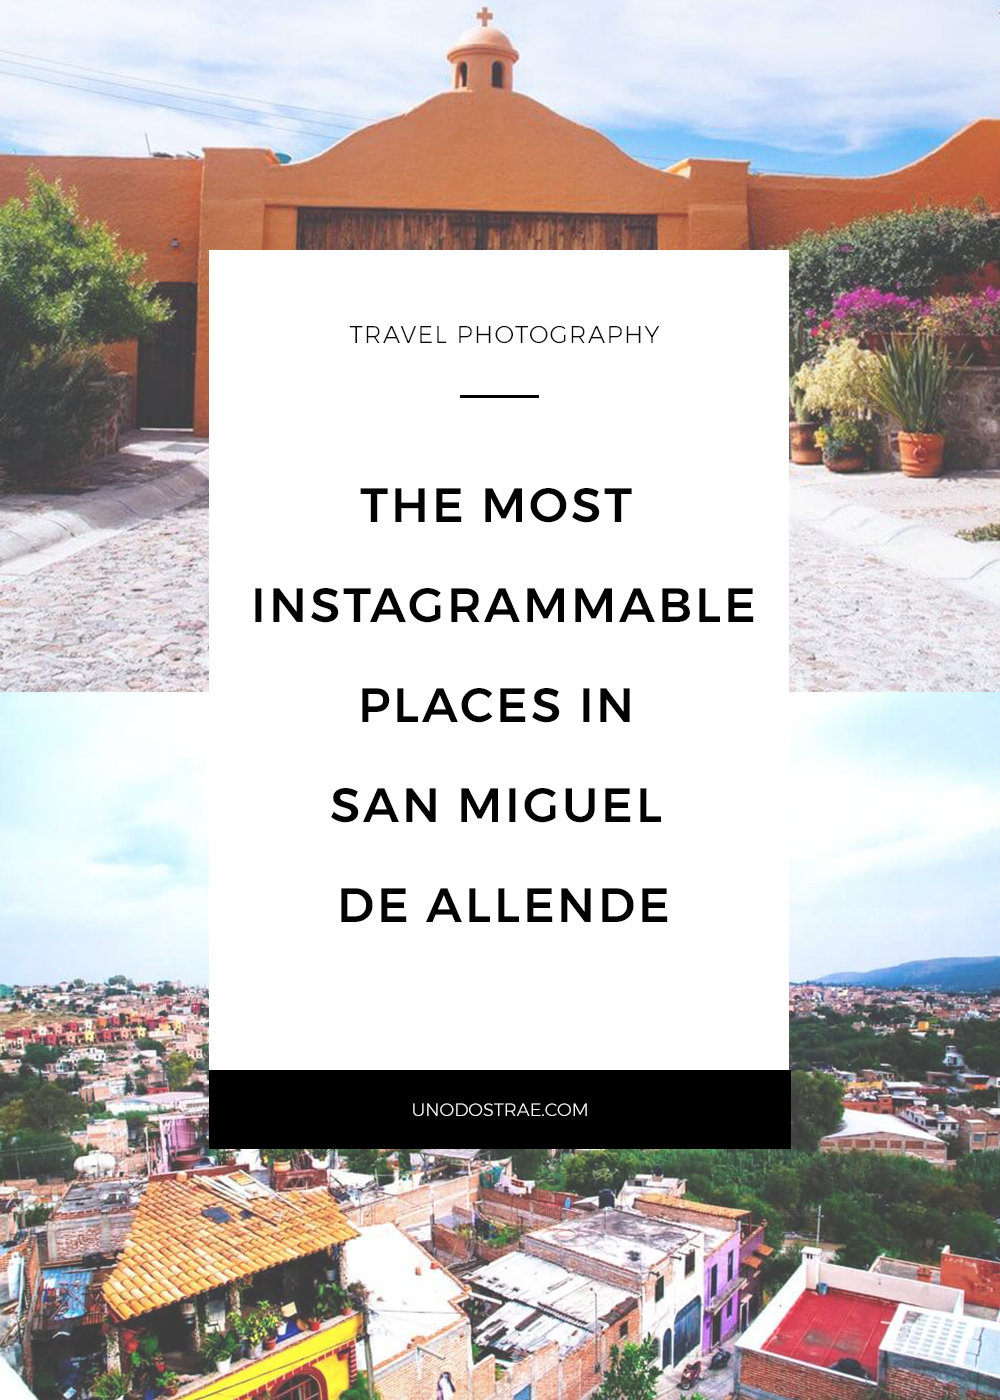 Colorful, vibrant and full of authentic scenes, San Miguel de Allende will be your Instagram's best friend. Find travel photography inspiration by reading more!